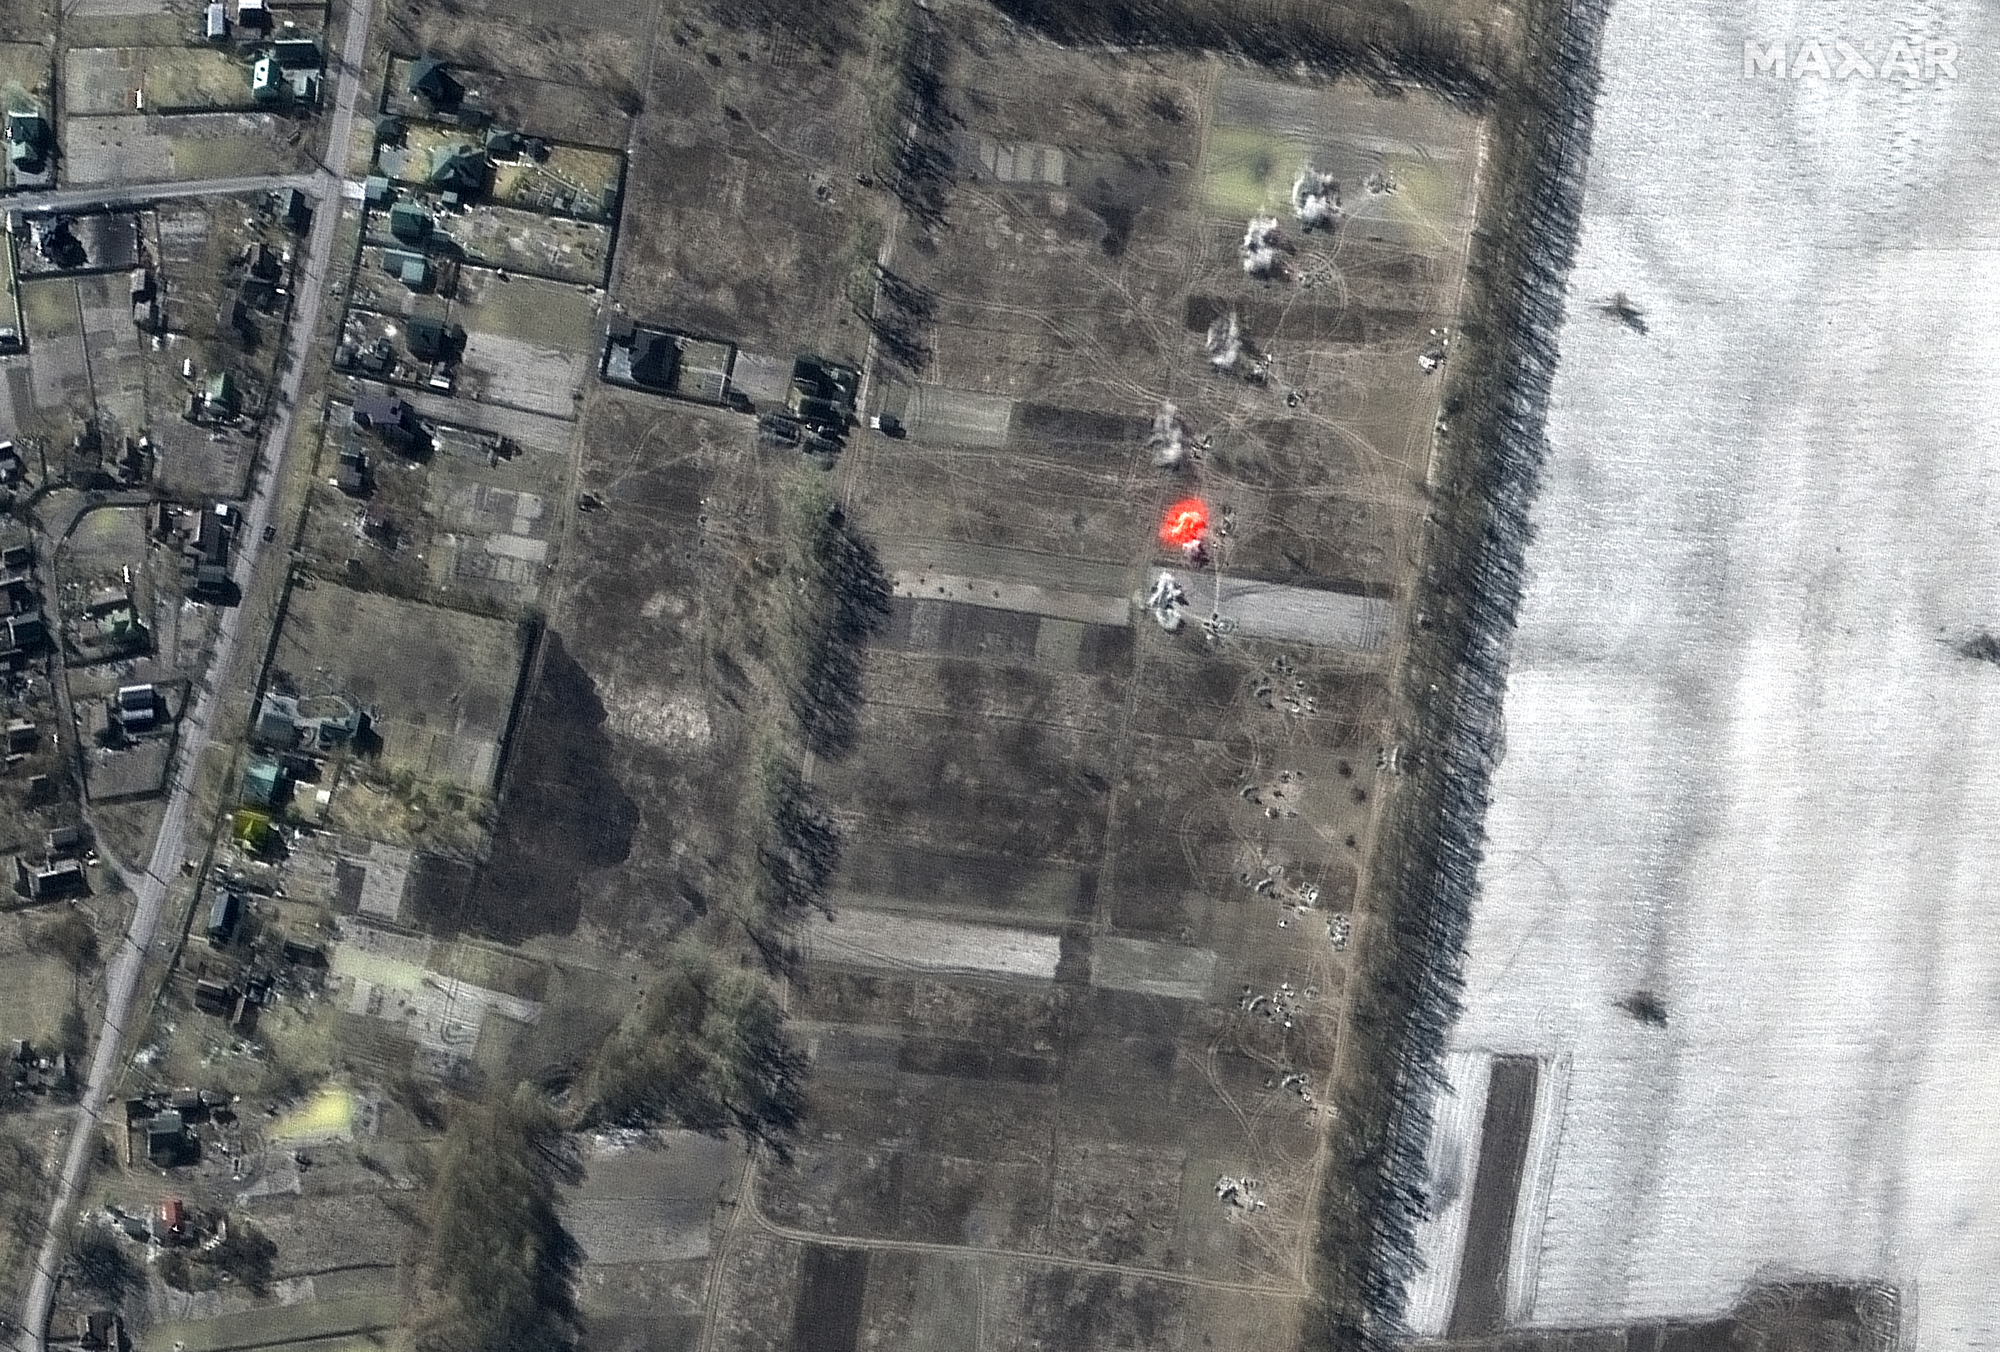 A multispectral satellite images of an artillery battalion actively firing in a southeasterly direction on March 11, 2022 as seen by the WorldView-2 satellite for Maxar Technologies.